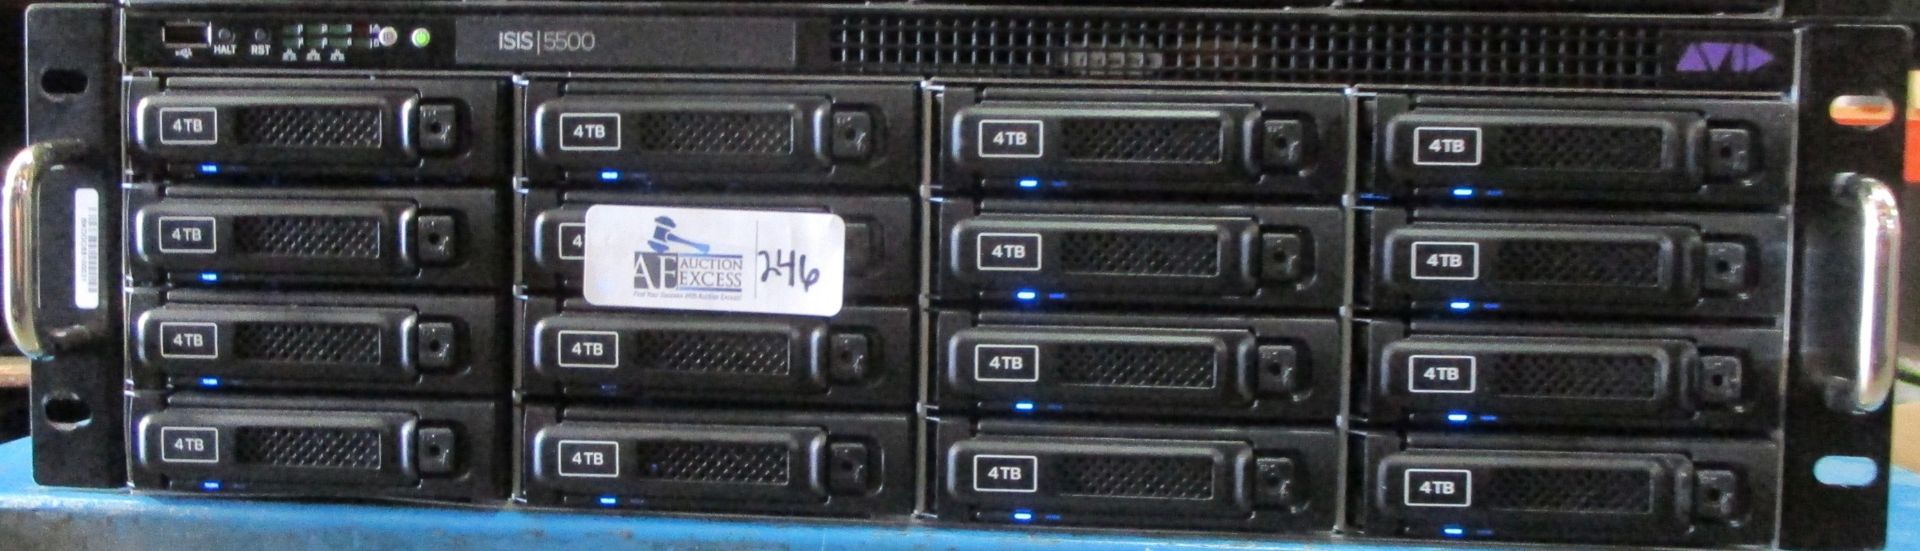 ISIS 5500 WITH 16 4TB HARD DRIVES